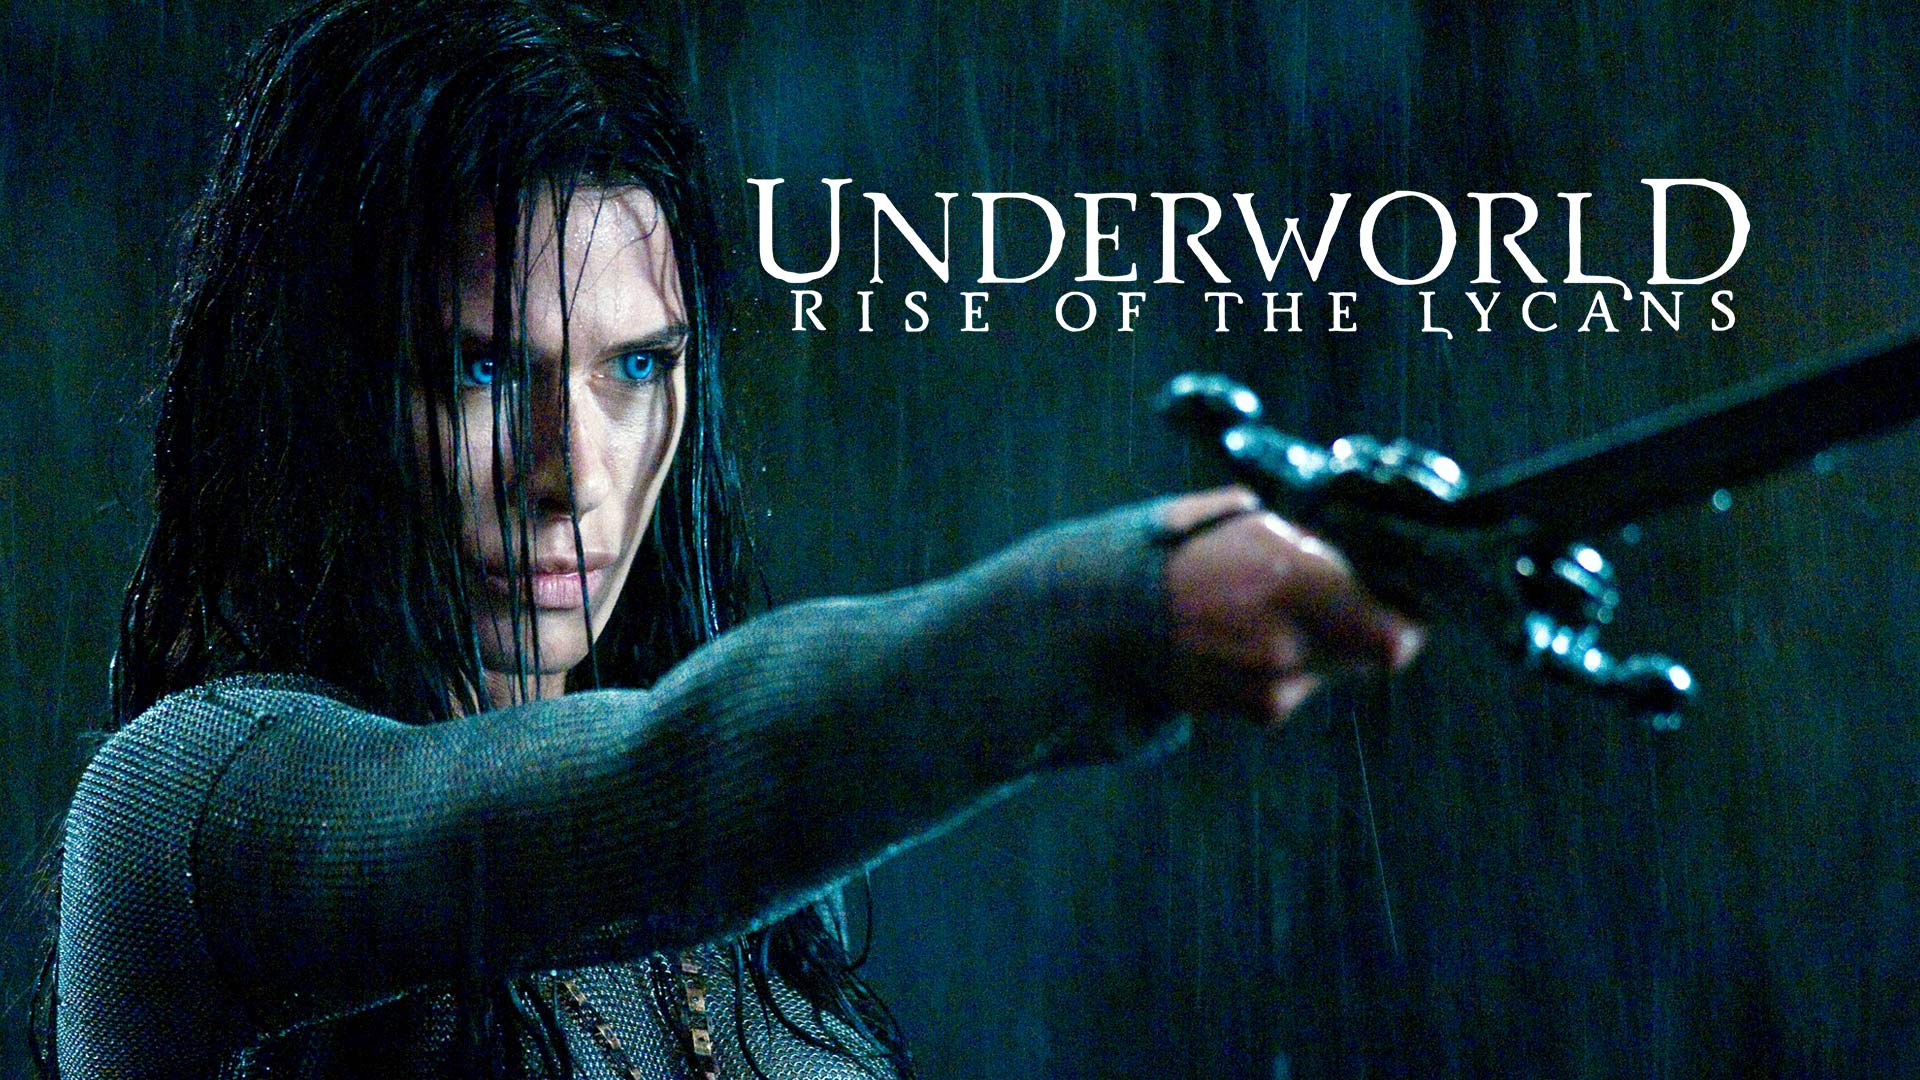 Watch Underworld: Rise of the Lycans Online | Stream Full Movies